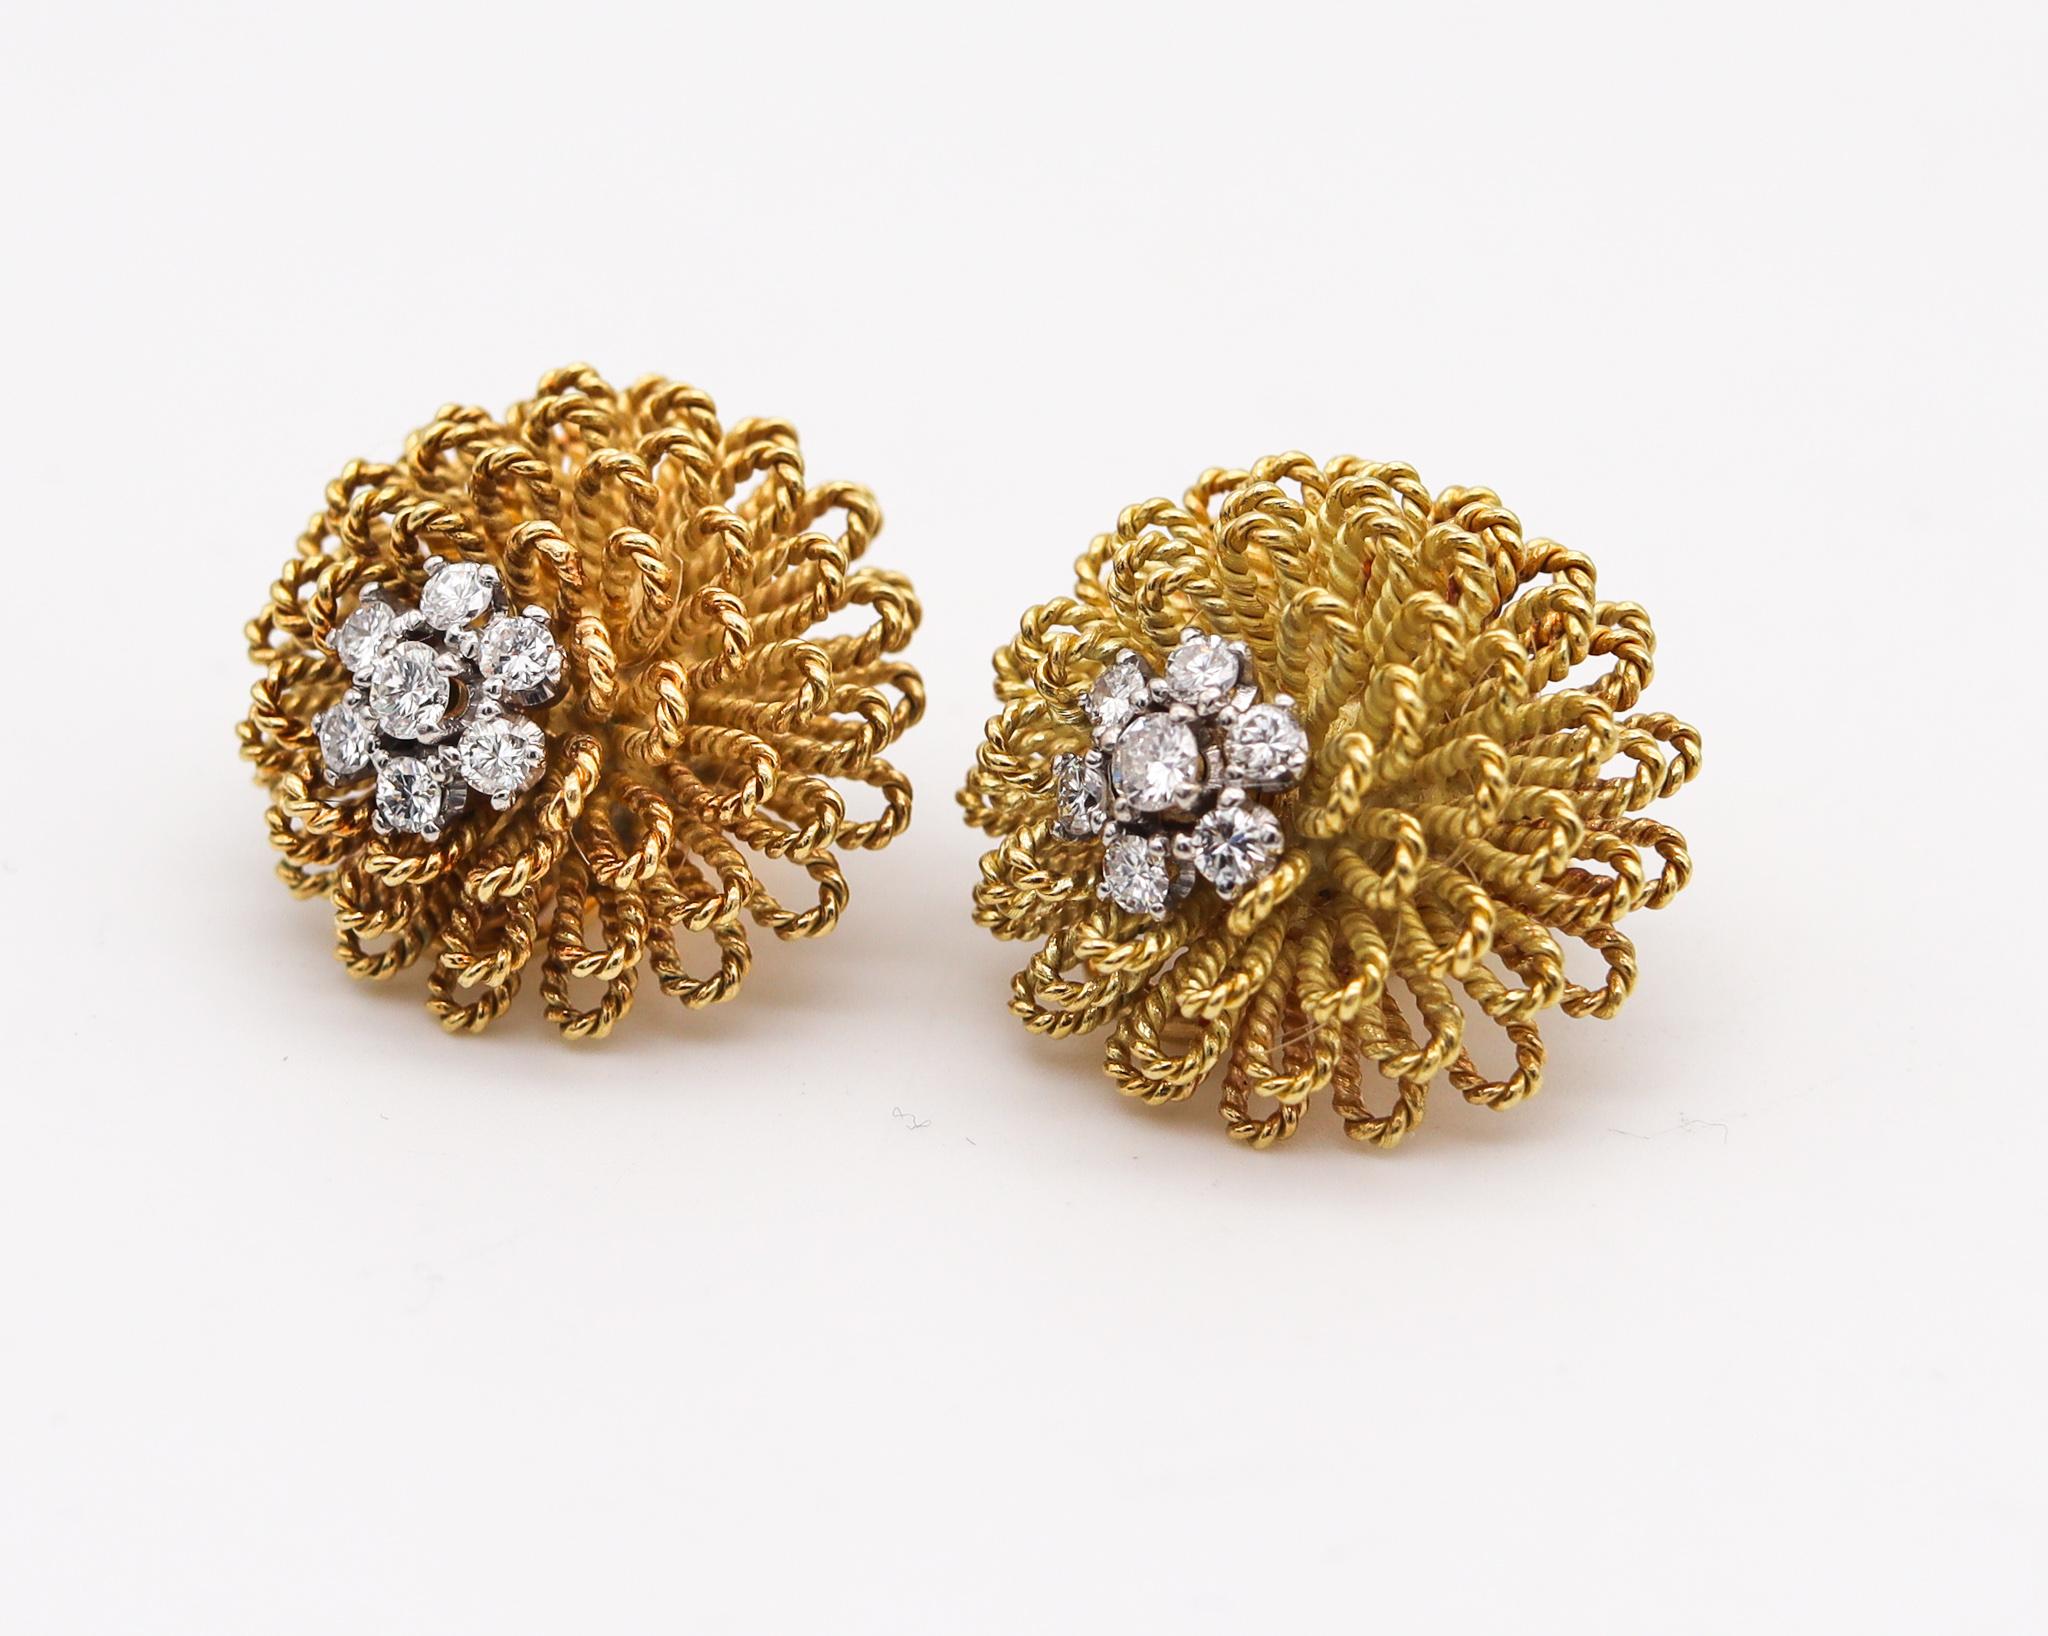 Retro modern diamond cluster earrings.

Beautiful pair of bombe textured clip-on earrings, created in Italy during the post war period, back in the early 1960. They was carefully crafted with an intricate pattern of twisted wires in solid yellow